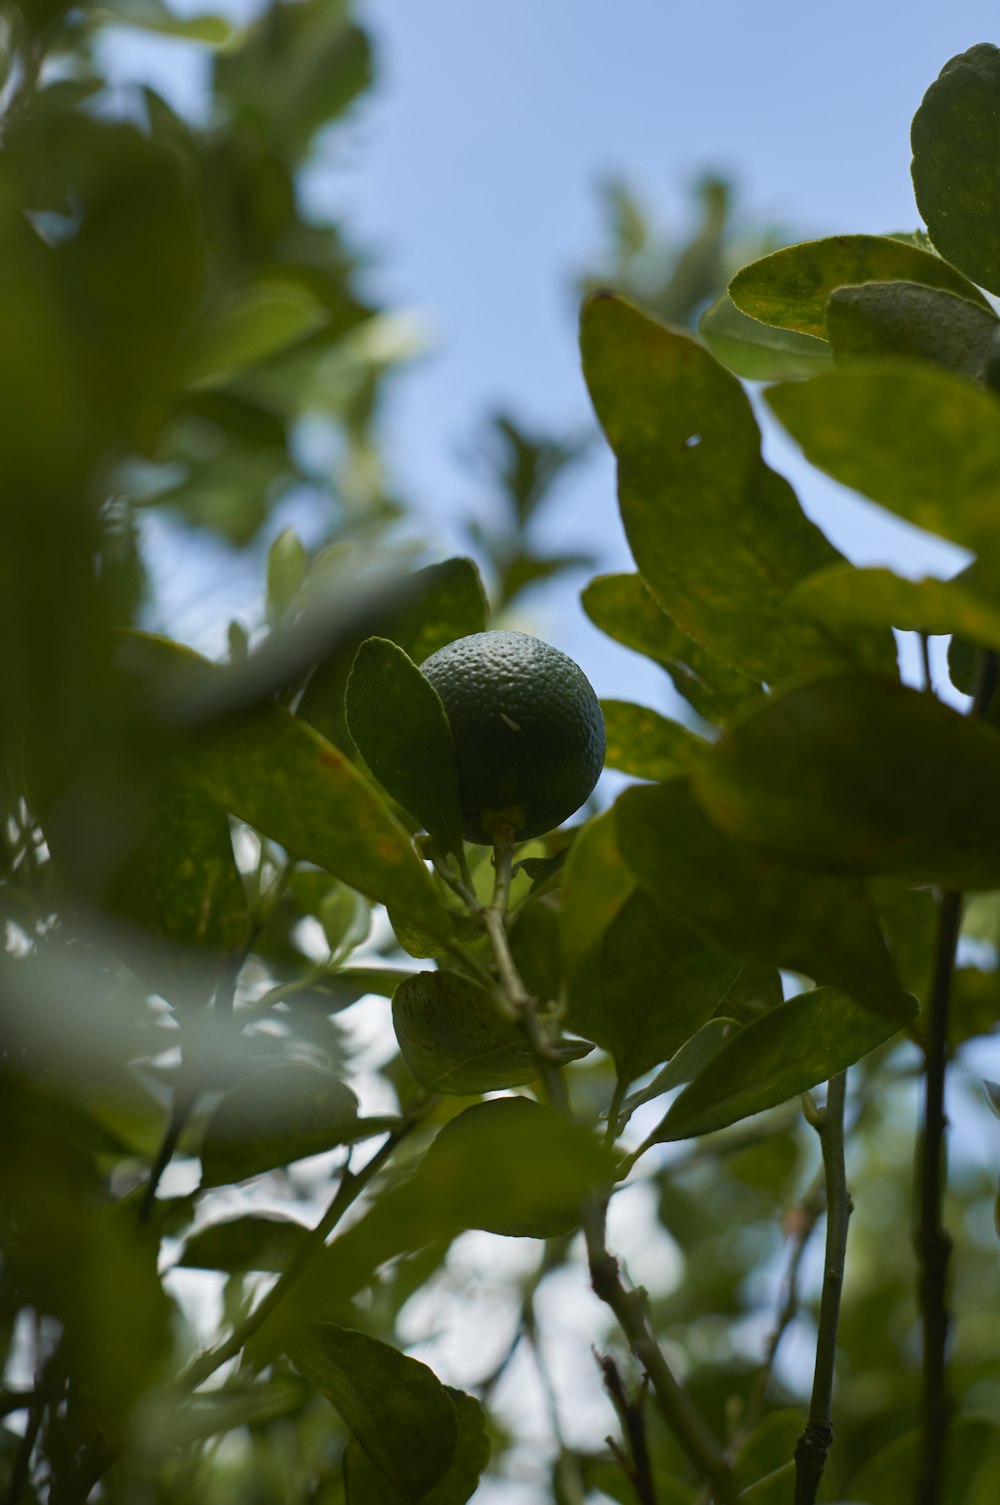 an avocado is growing on a tree branch